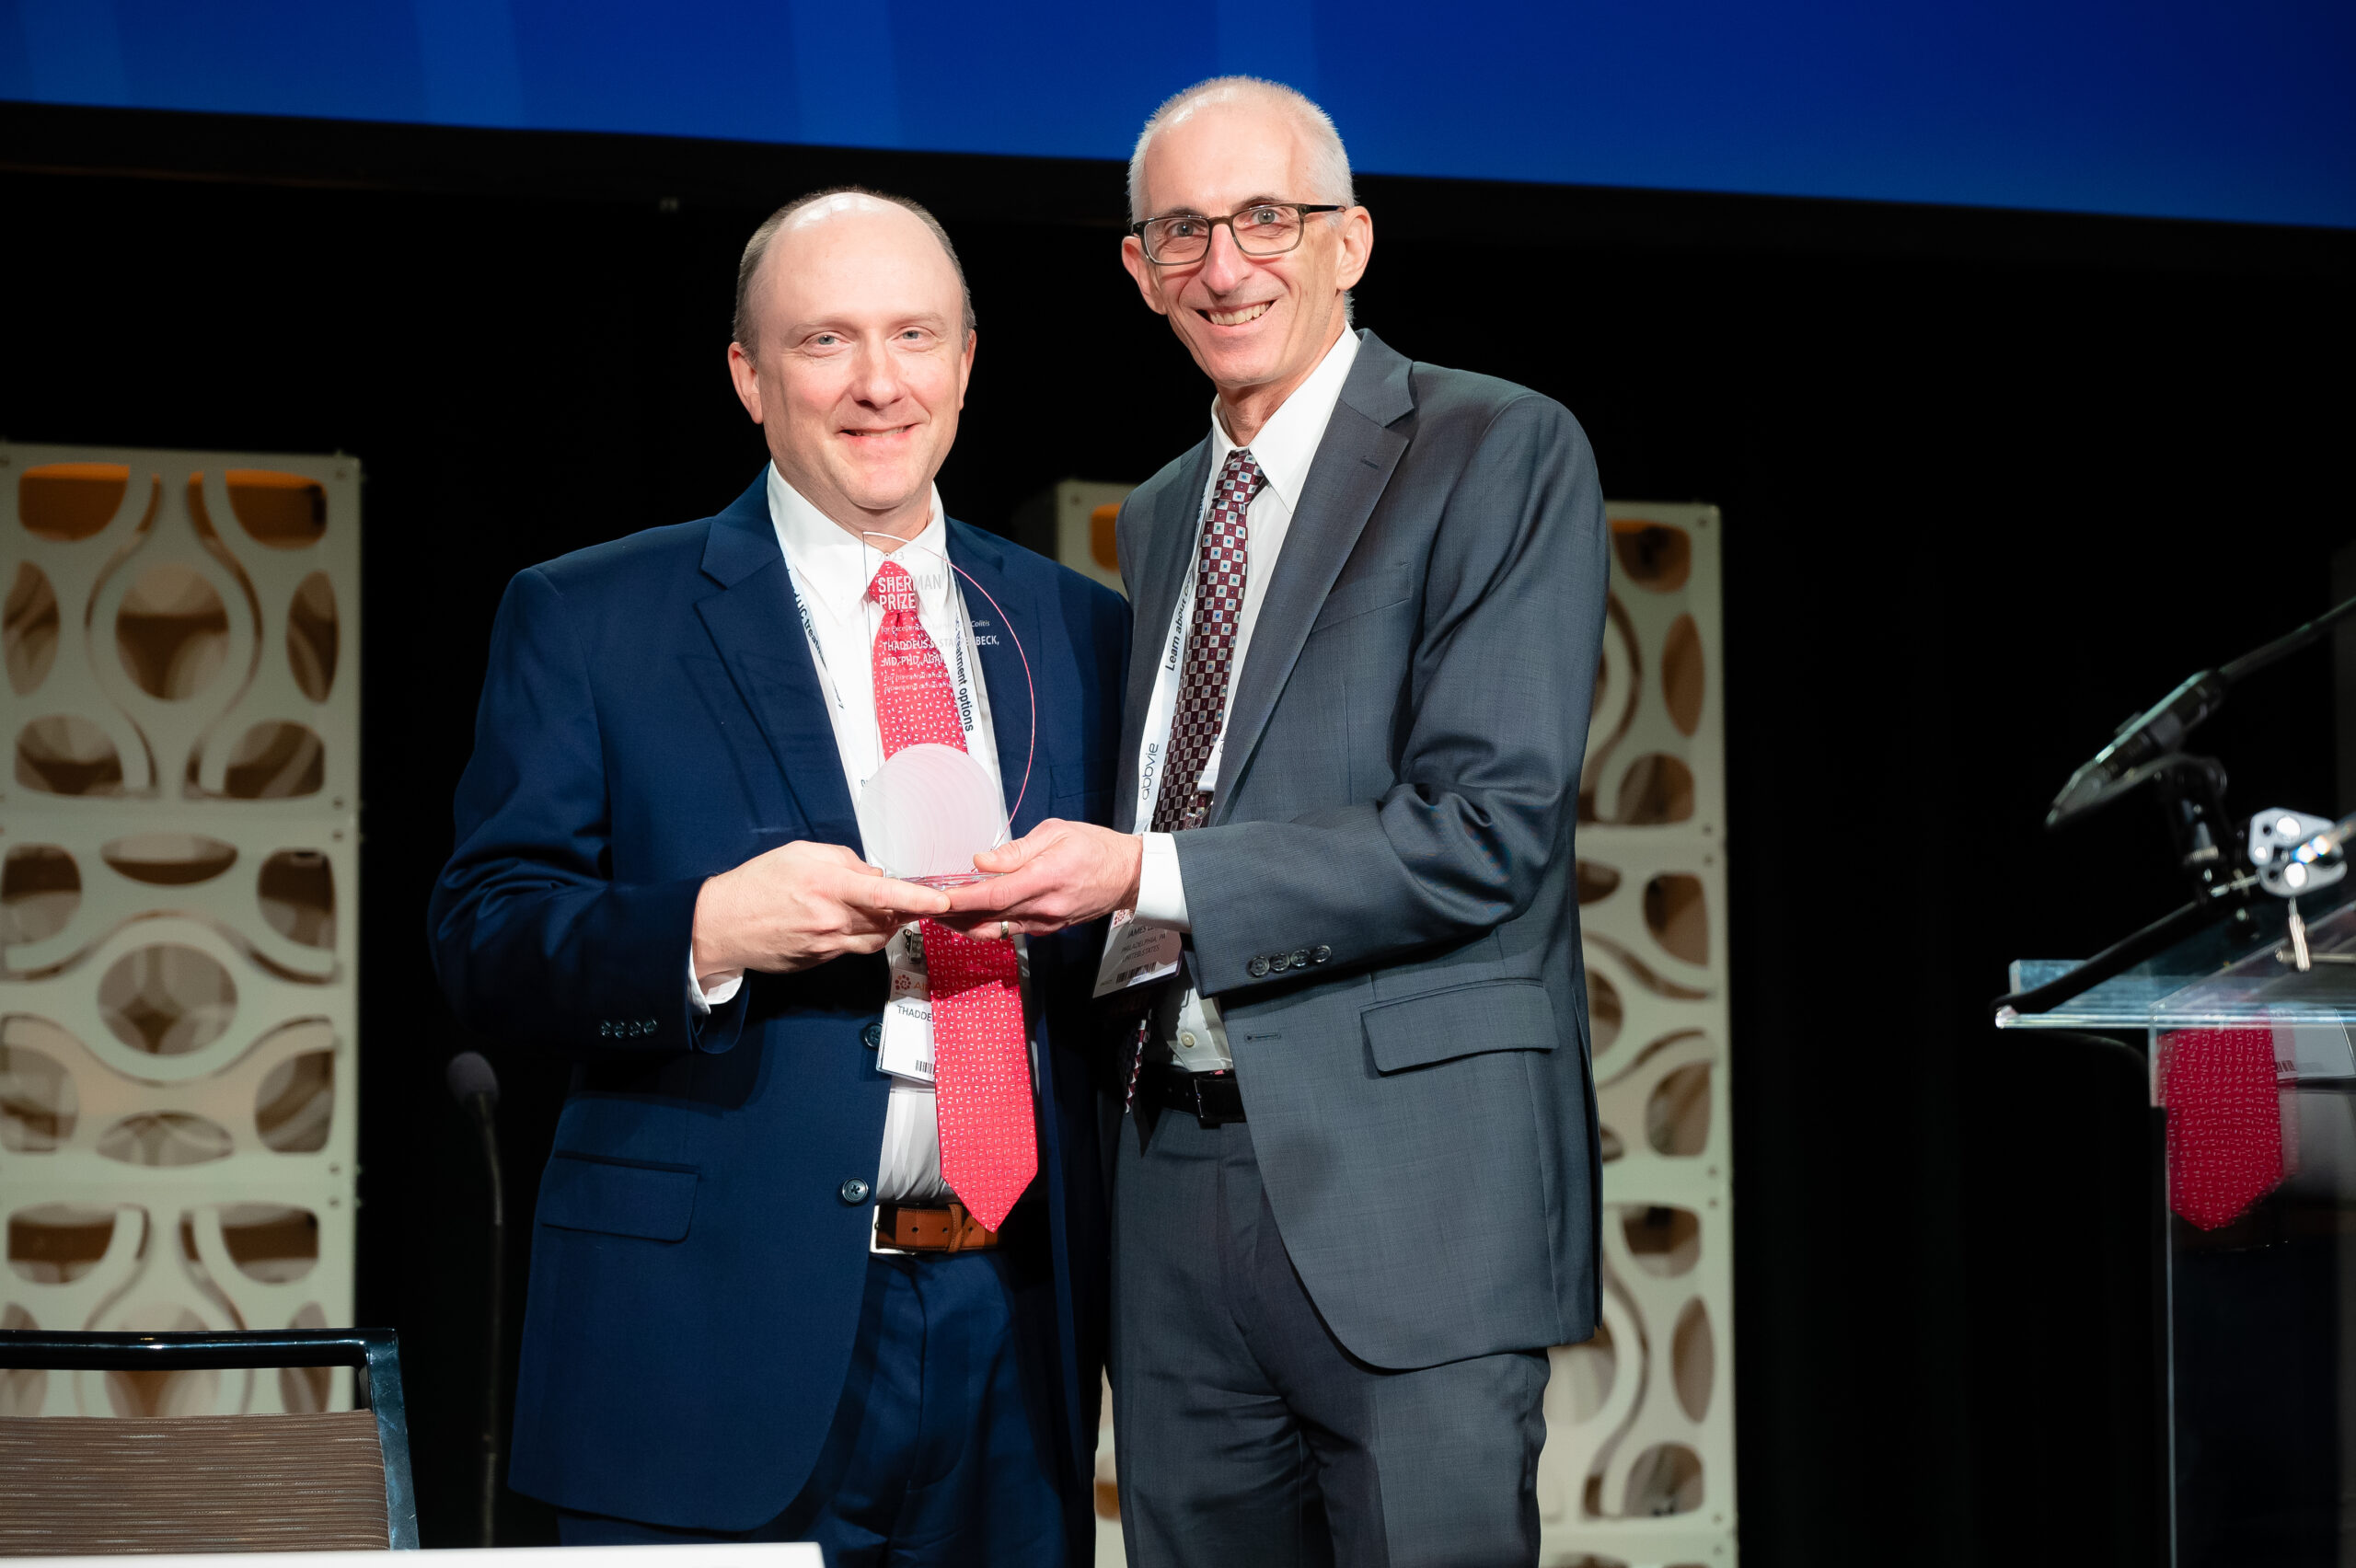 <p>2023 Sherman Prize Recipient Thaddeus S. Stappenbeck, MD, PhD and 2023 Selection Committee Member James D. Lewis, MD, MSCE</p>
